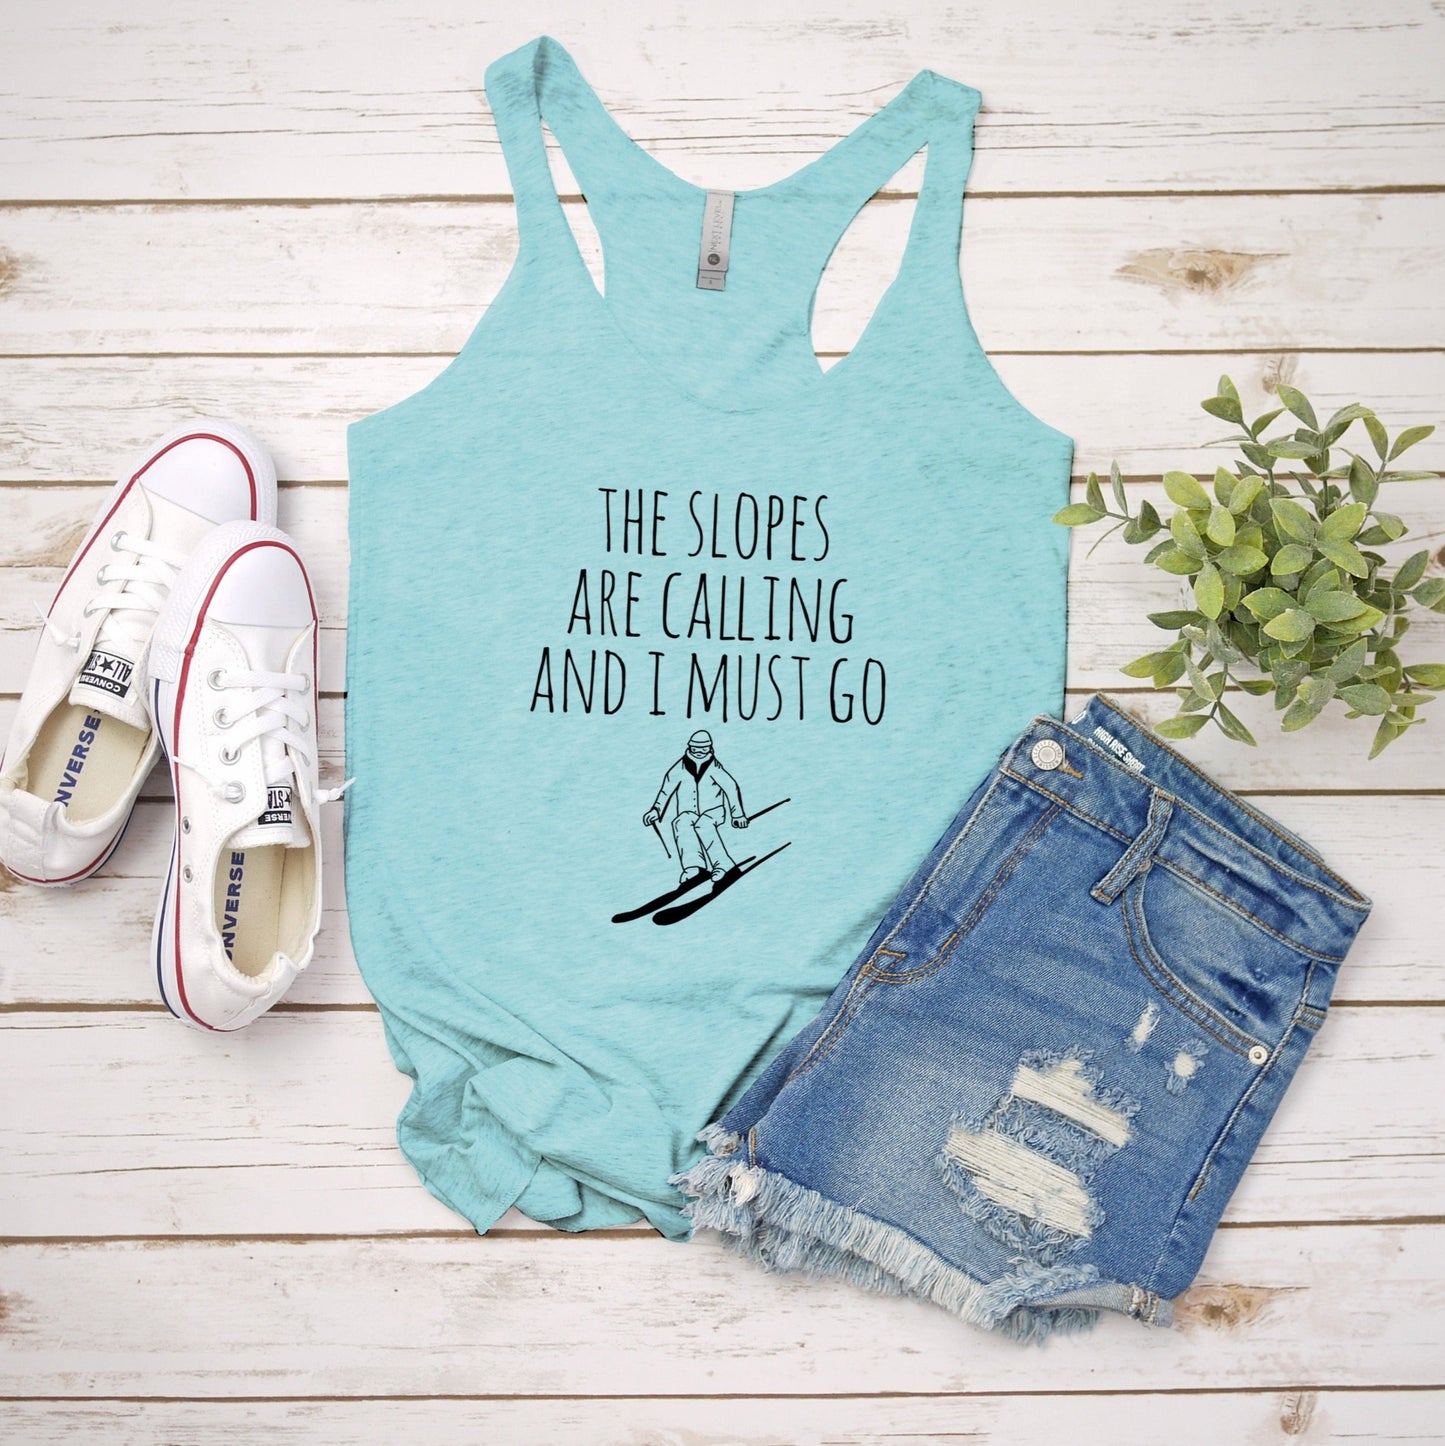 Slopes Are Calling And I Must Go (Skiing) - Women's Tank - Heather Gray, Tahiti, or Envy